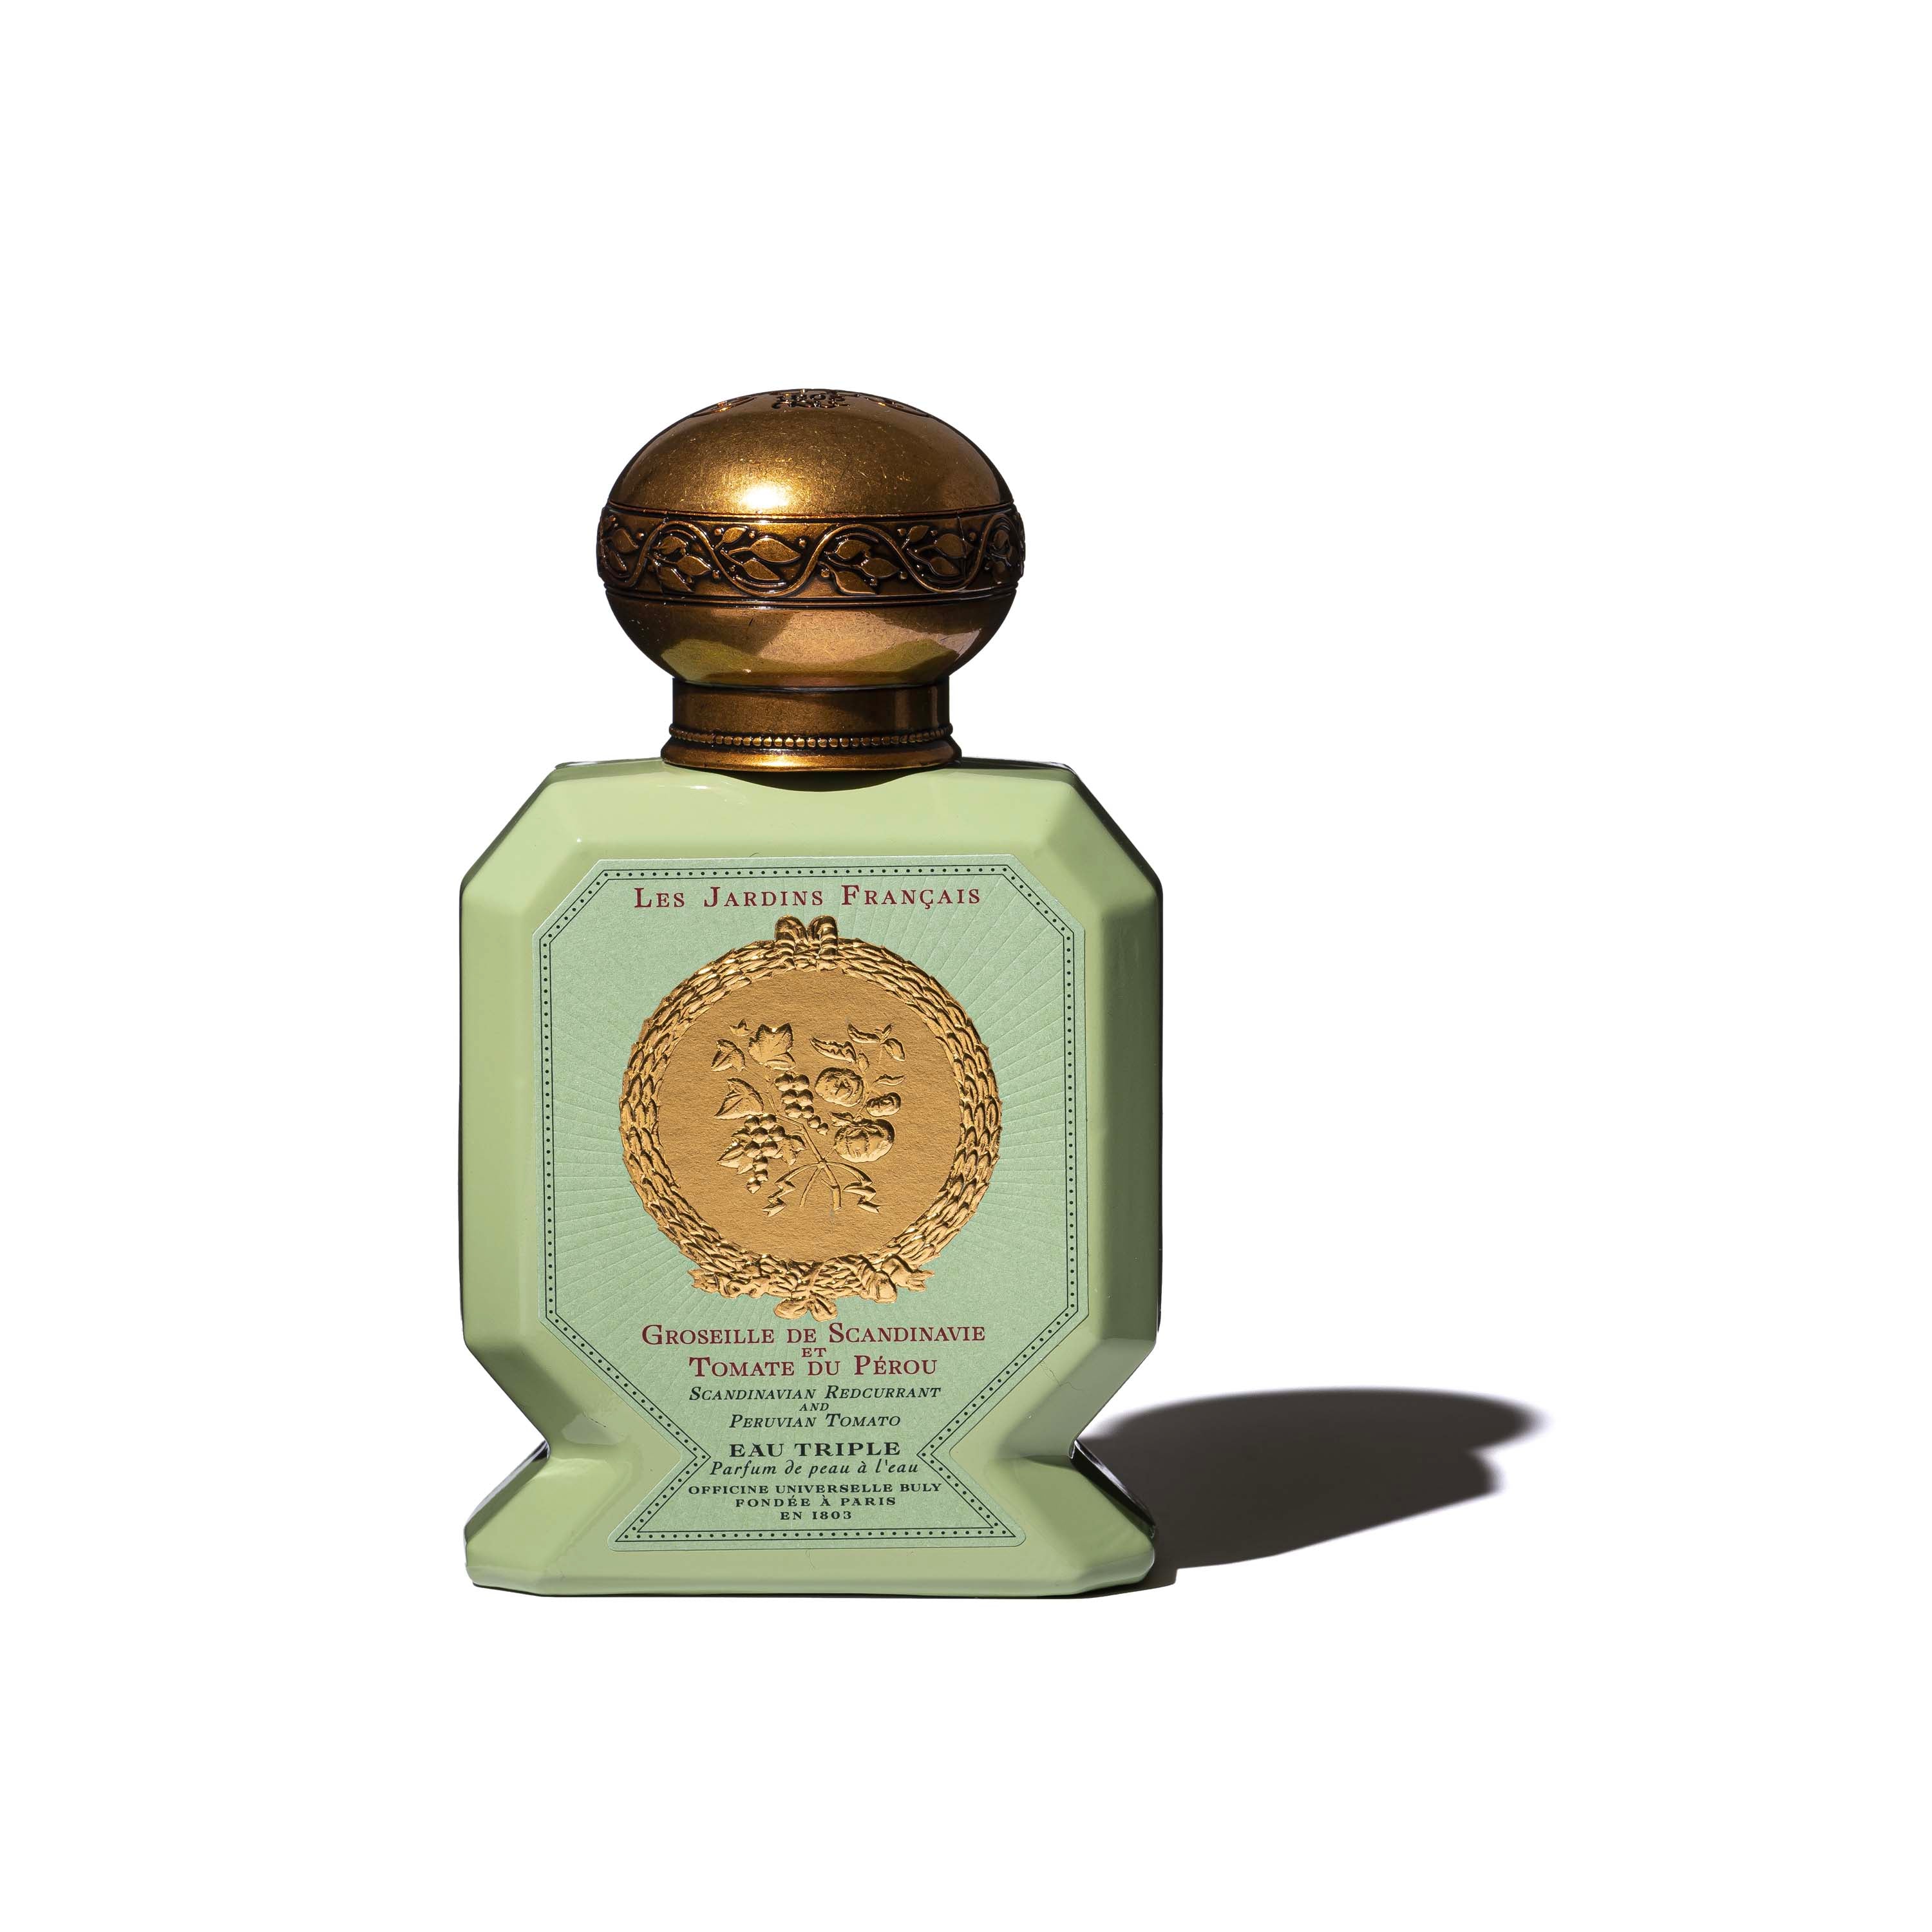 Wanderer Perfume Fall Inspired Perfume With Notes of